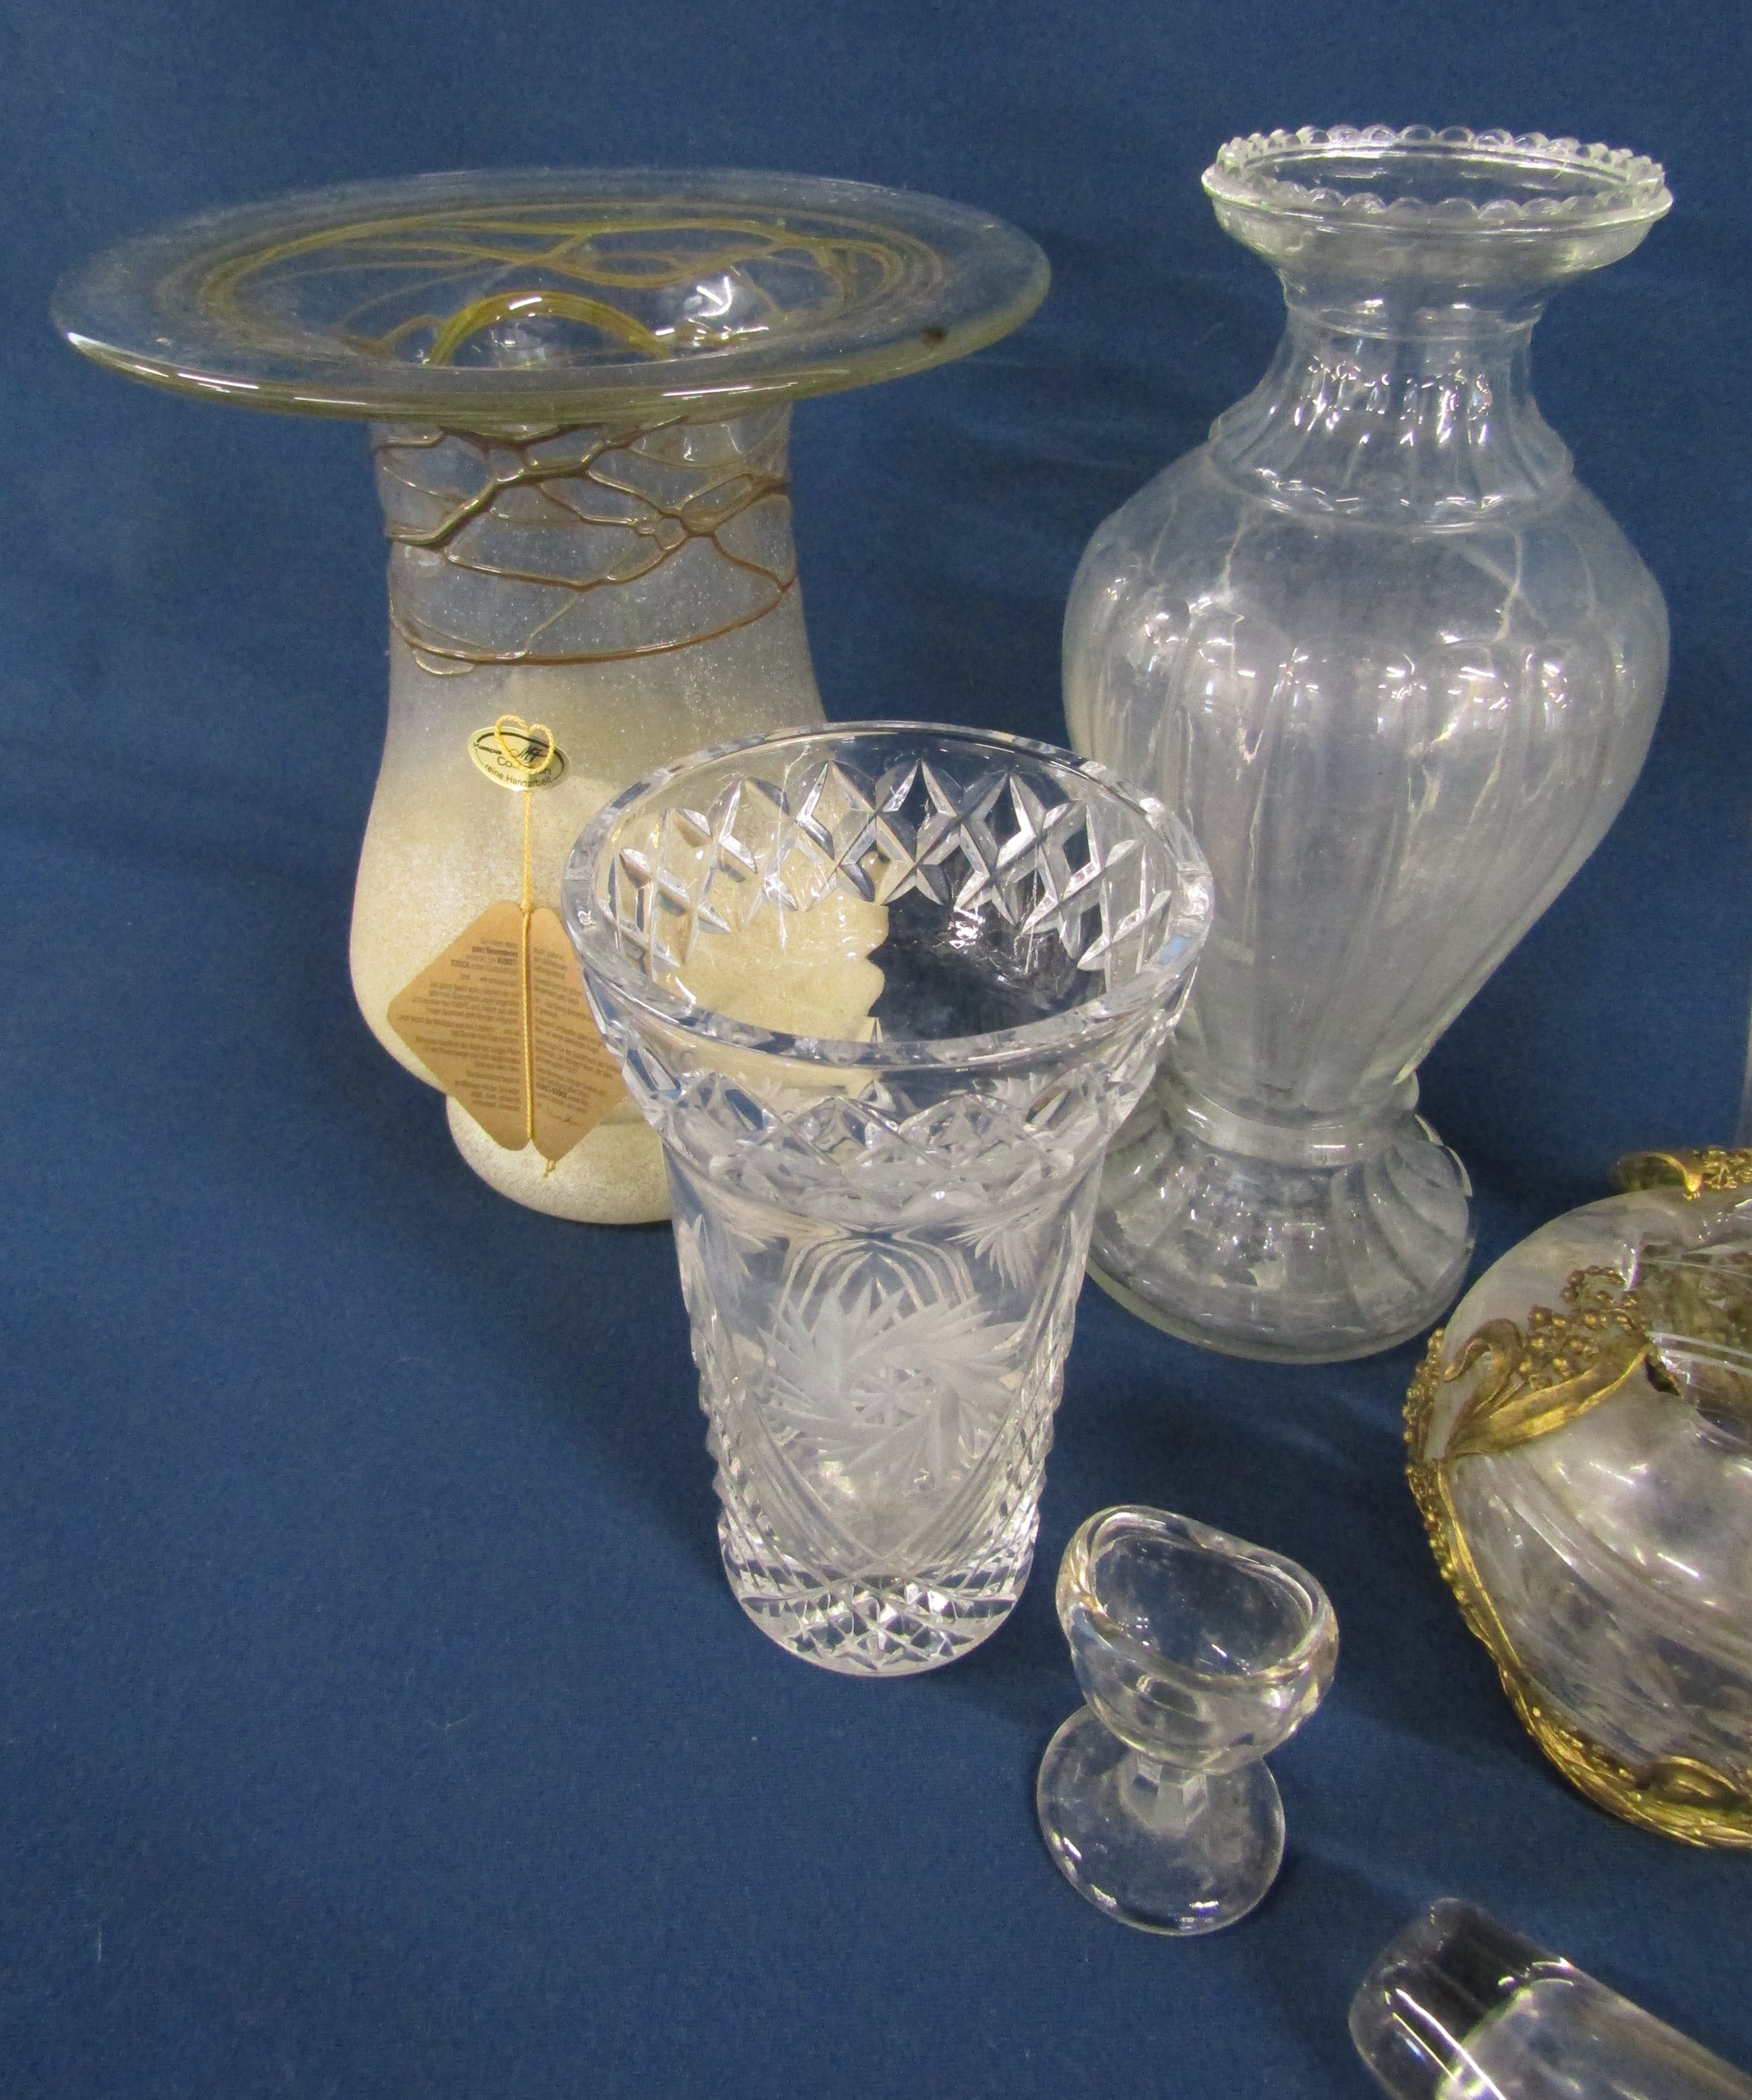 Glassware includes mounted vases, hors-d'oeuvre tray, vases etc - Image 2 of 5